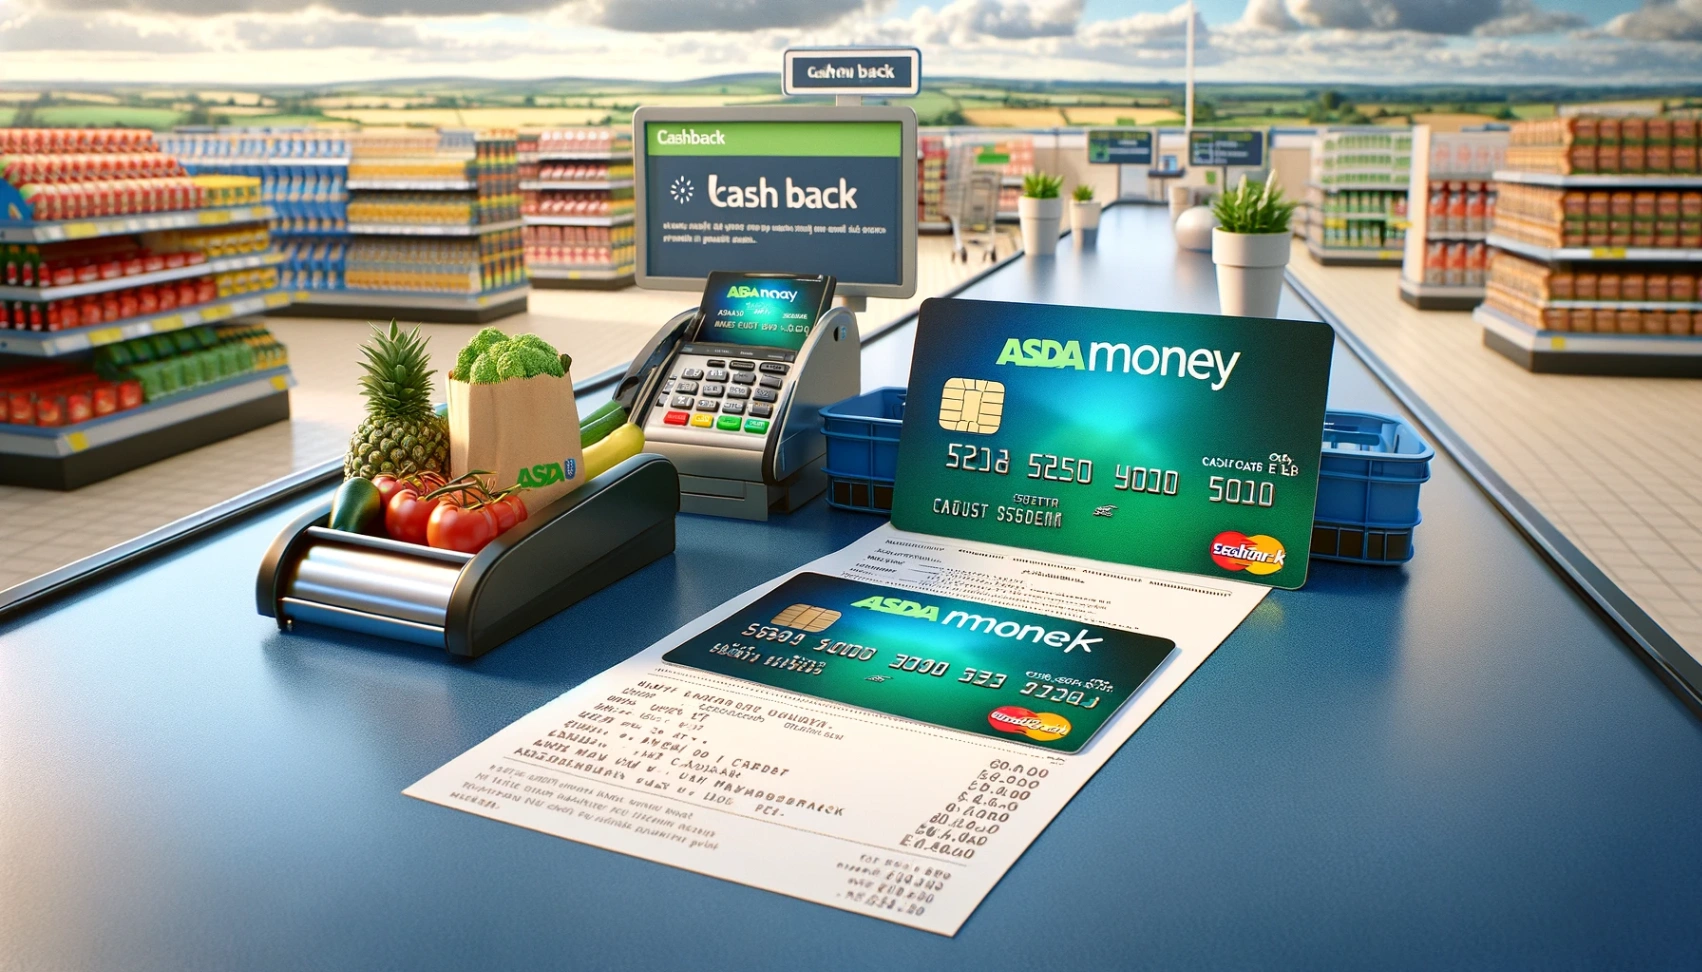 Asda Money Cashback Credit Card - Learn How to Apply